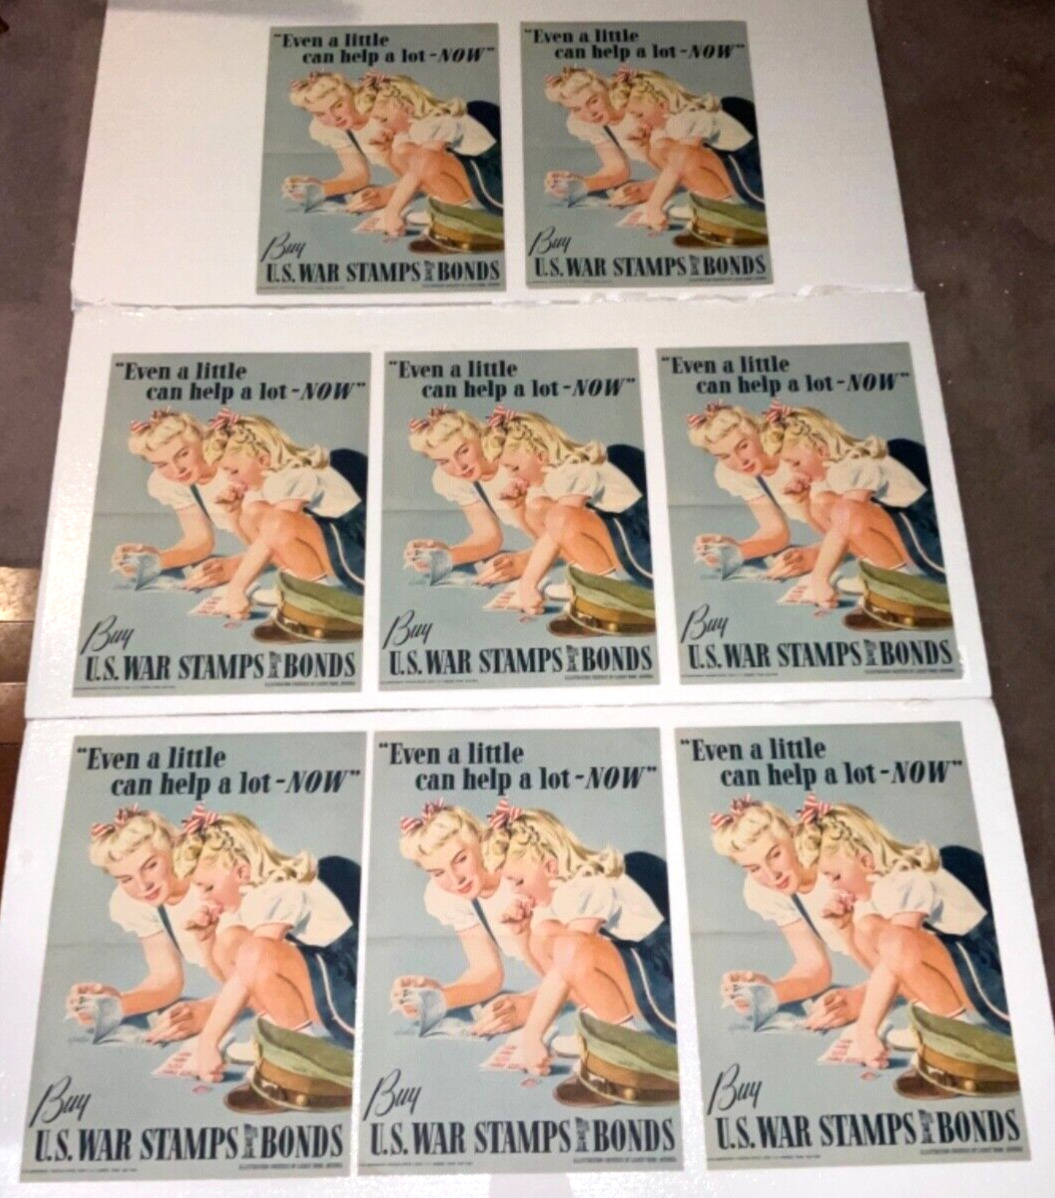 WWII BUY WAR STAMPS & BONDS ADVERTISING POSTERS - RARE LOT OF 7 NOS POSTERS-READ